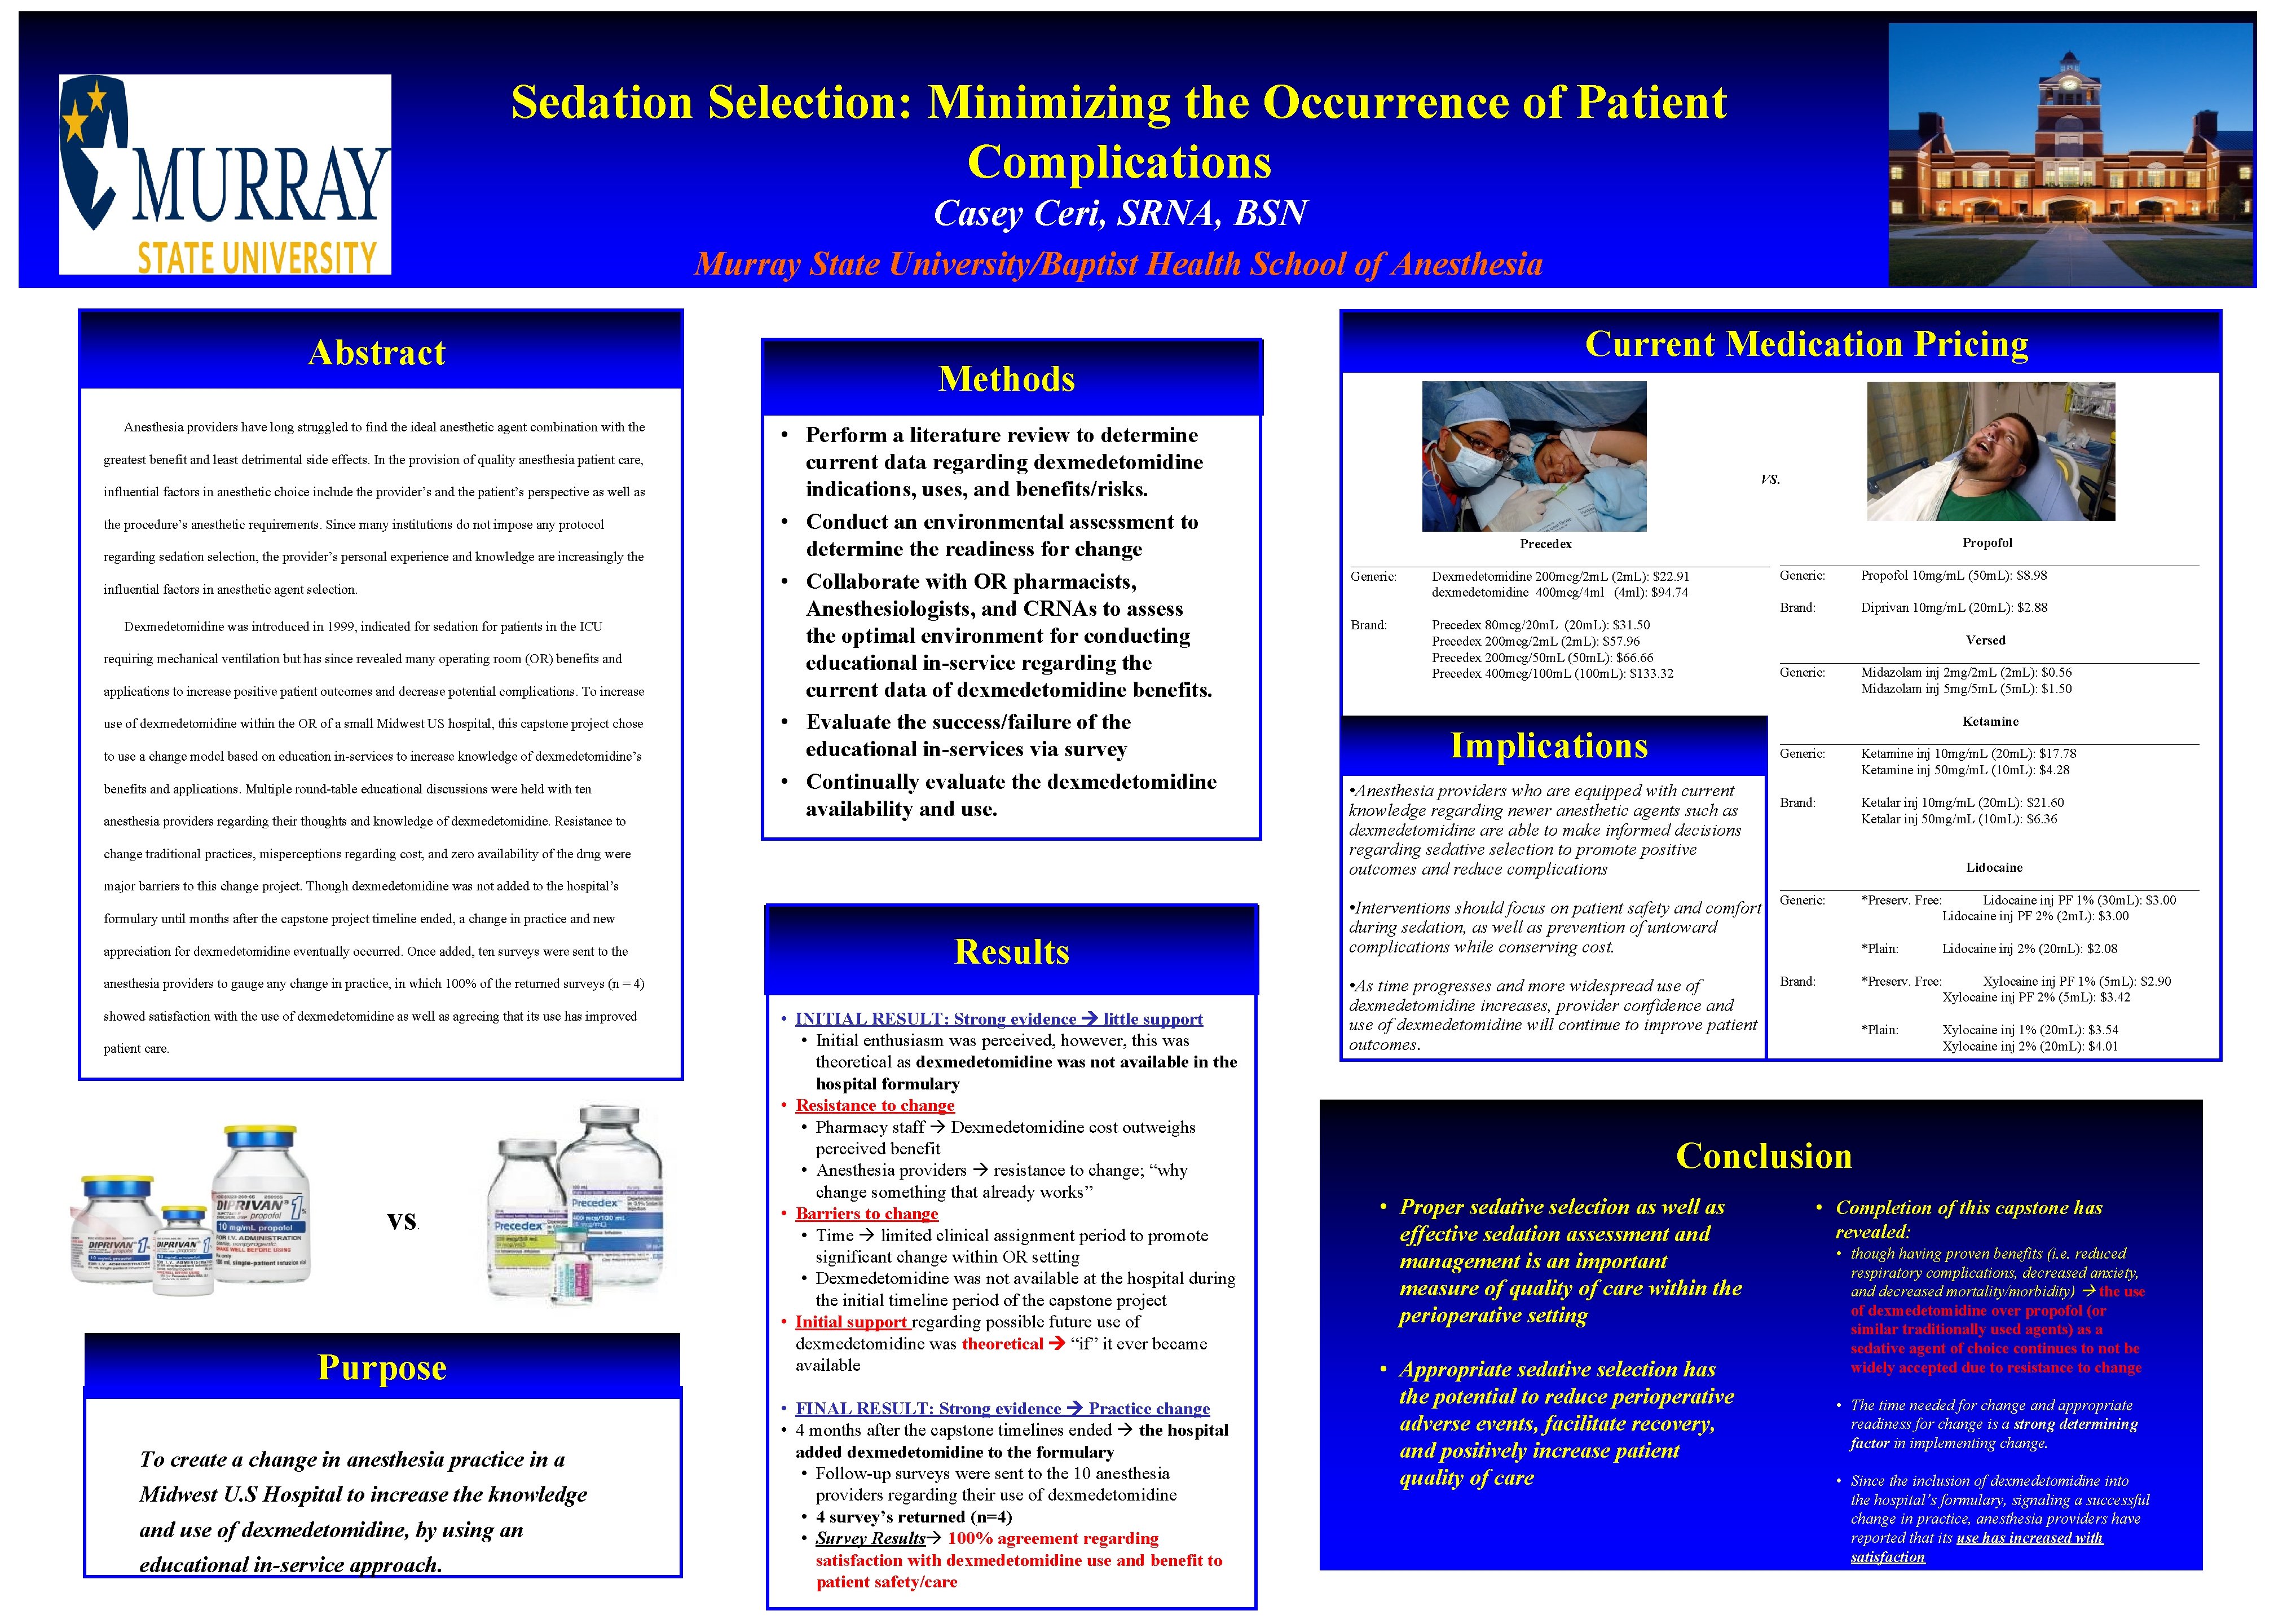 Sedation Selection: Minimizing the Occurrence of Patient Complications Casey Ceri, SRNA, BSN Murray State